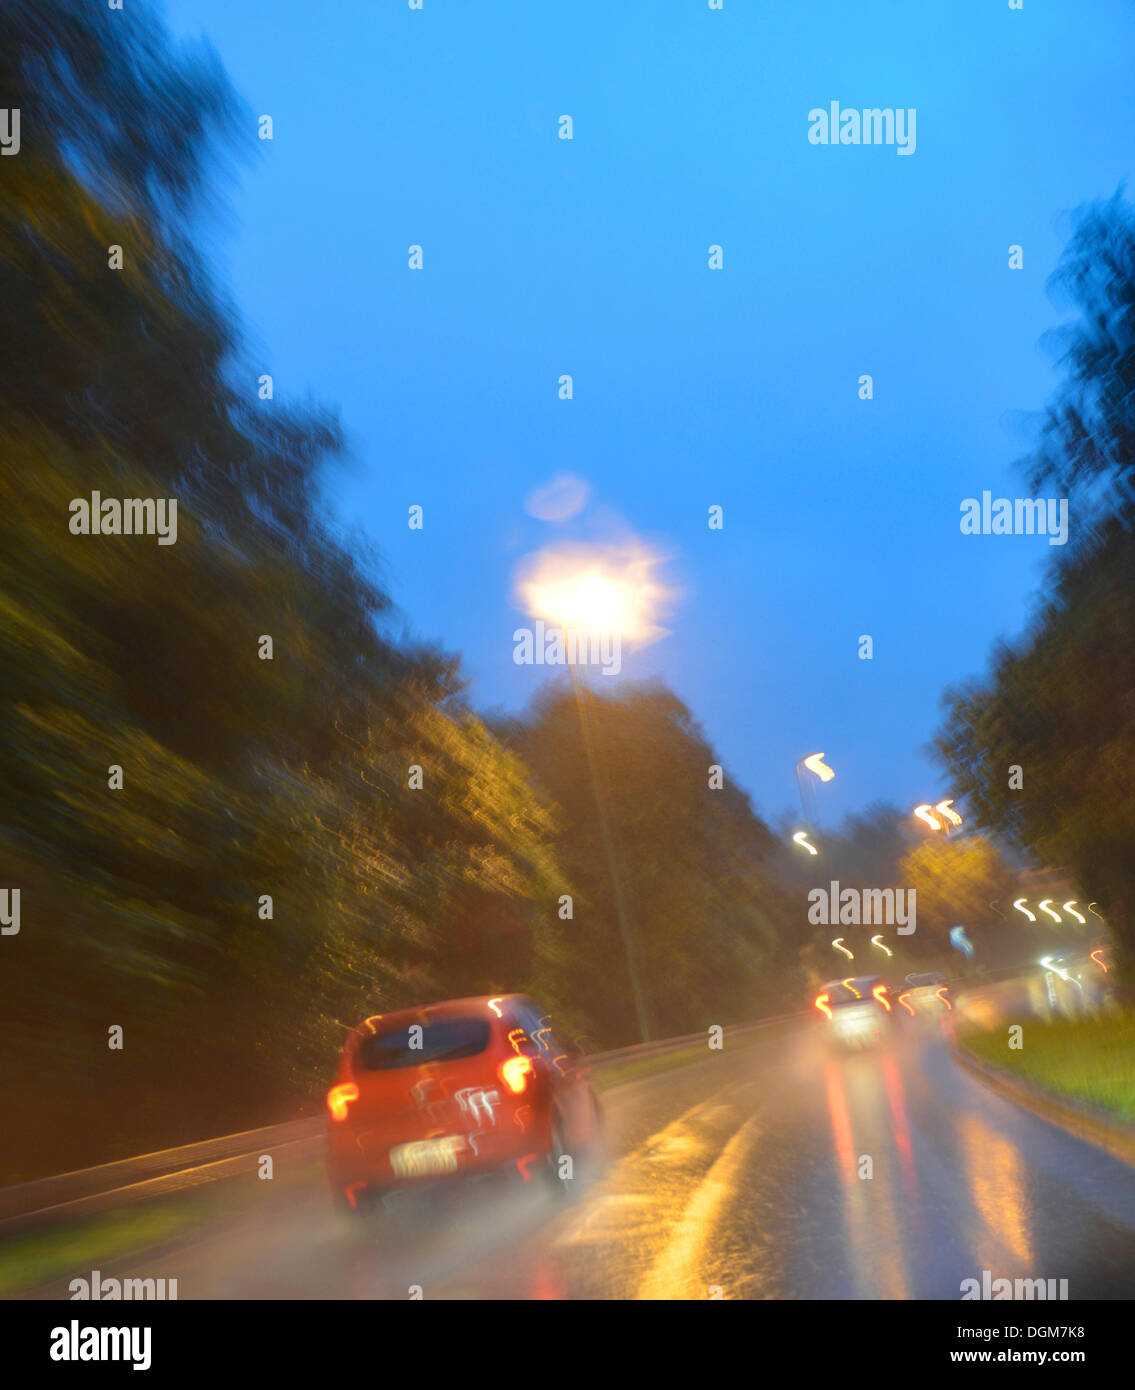 Drunk driving, vision impaired through alcohol or drugs, danger, poor visibility in rain and night, München, Bavaria, Germany Stock Photo